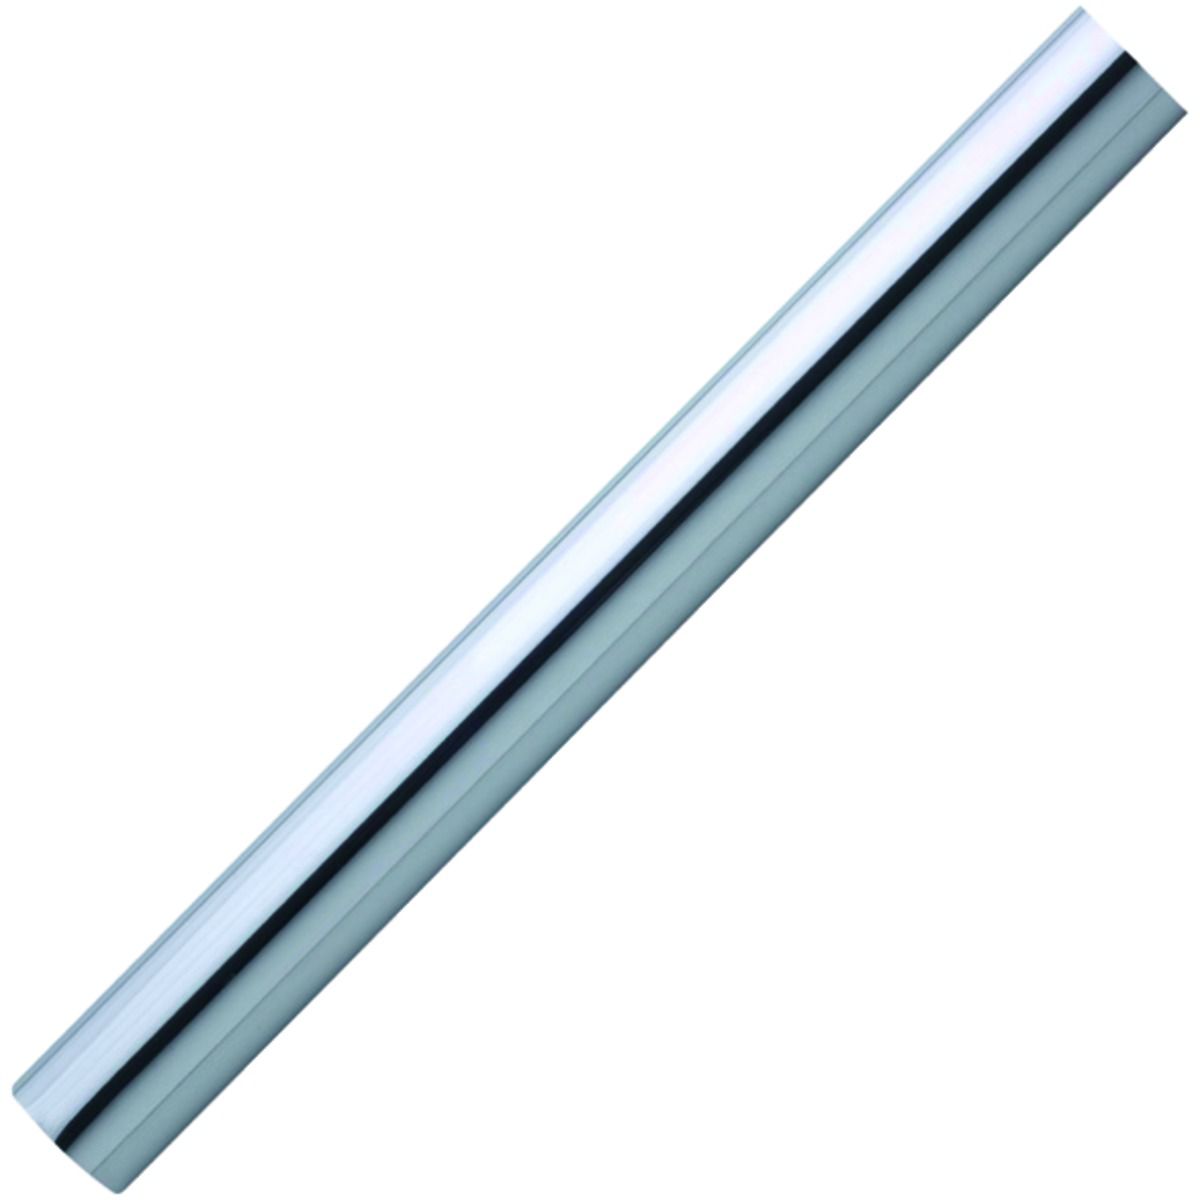 Image of Wickes Polished Chrome Handrail - 40mm x 1.8m